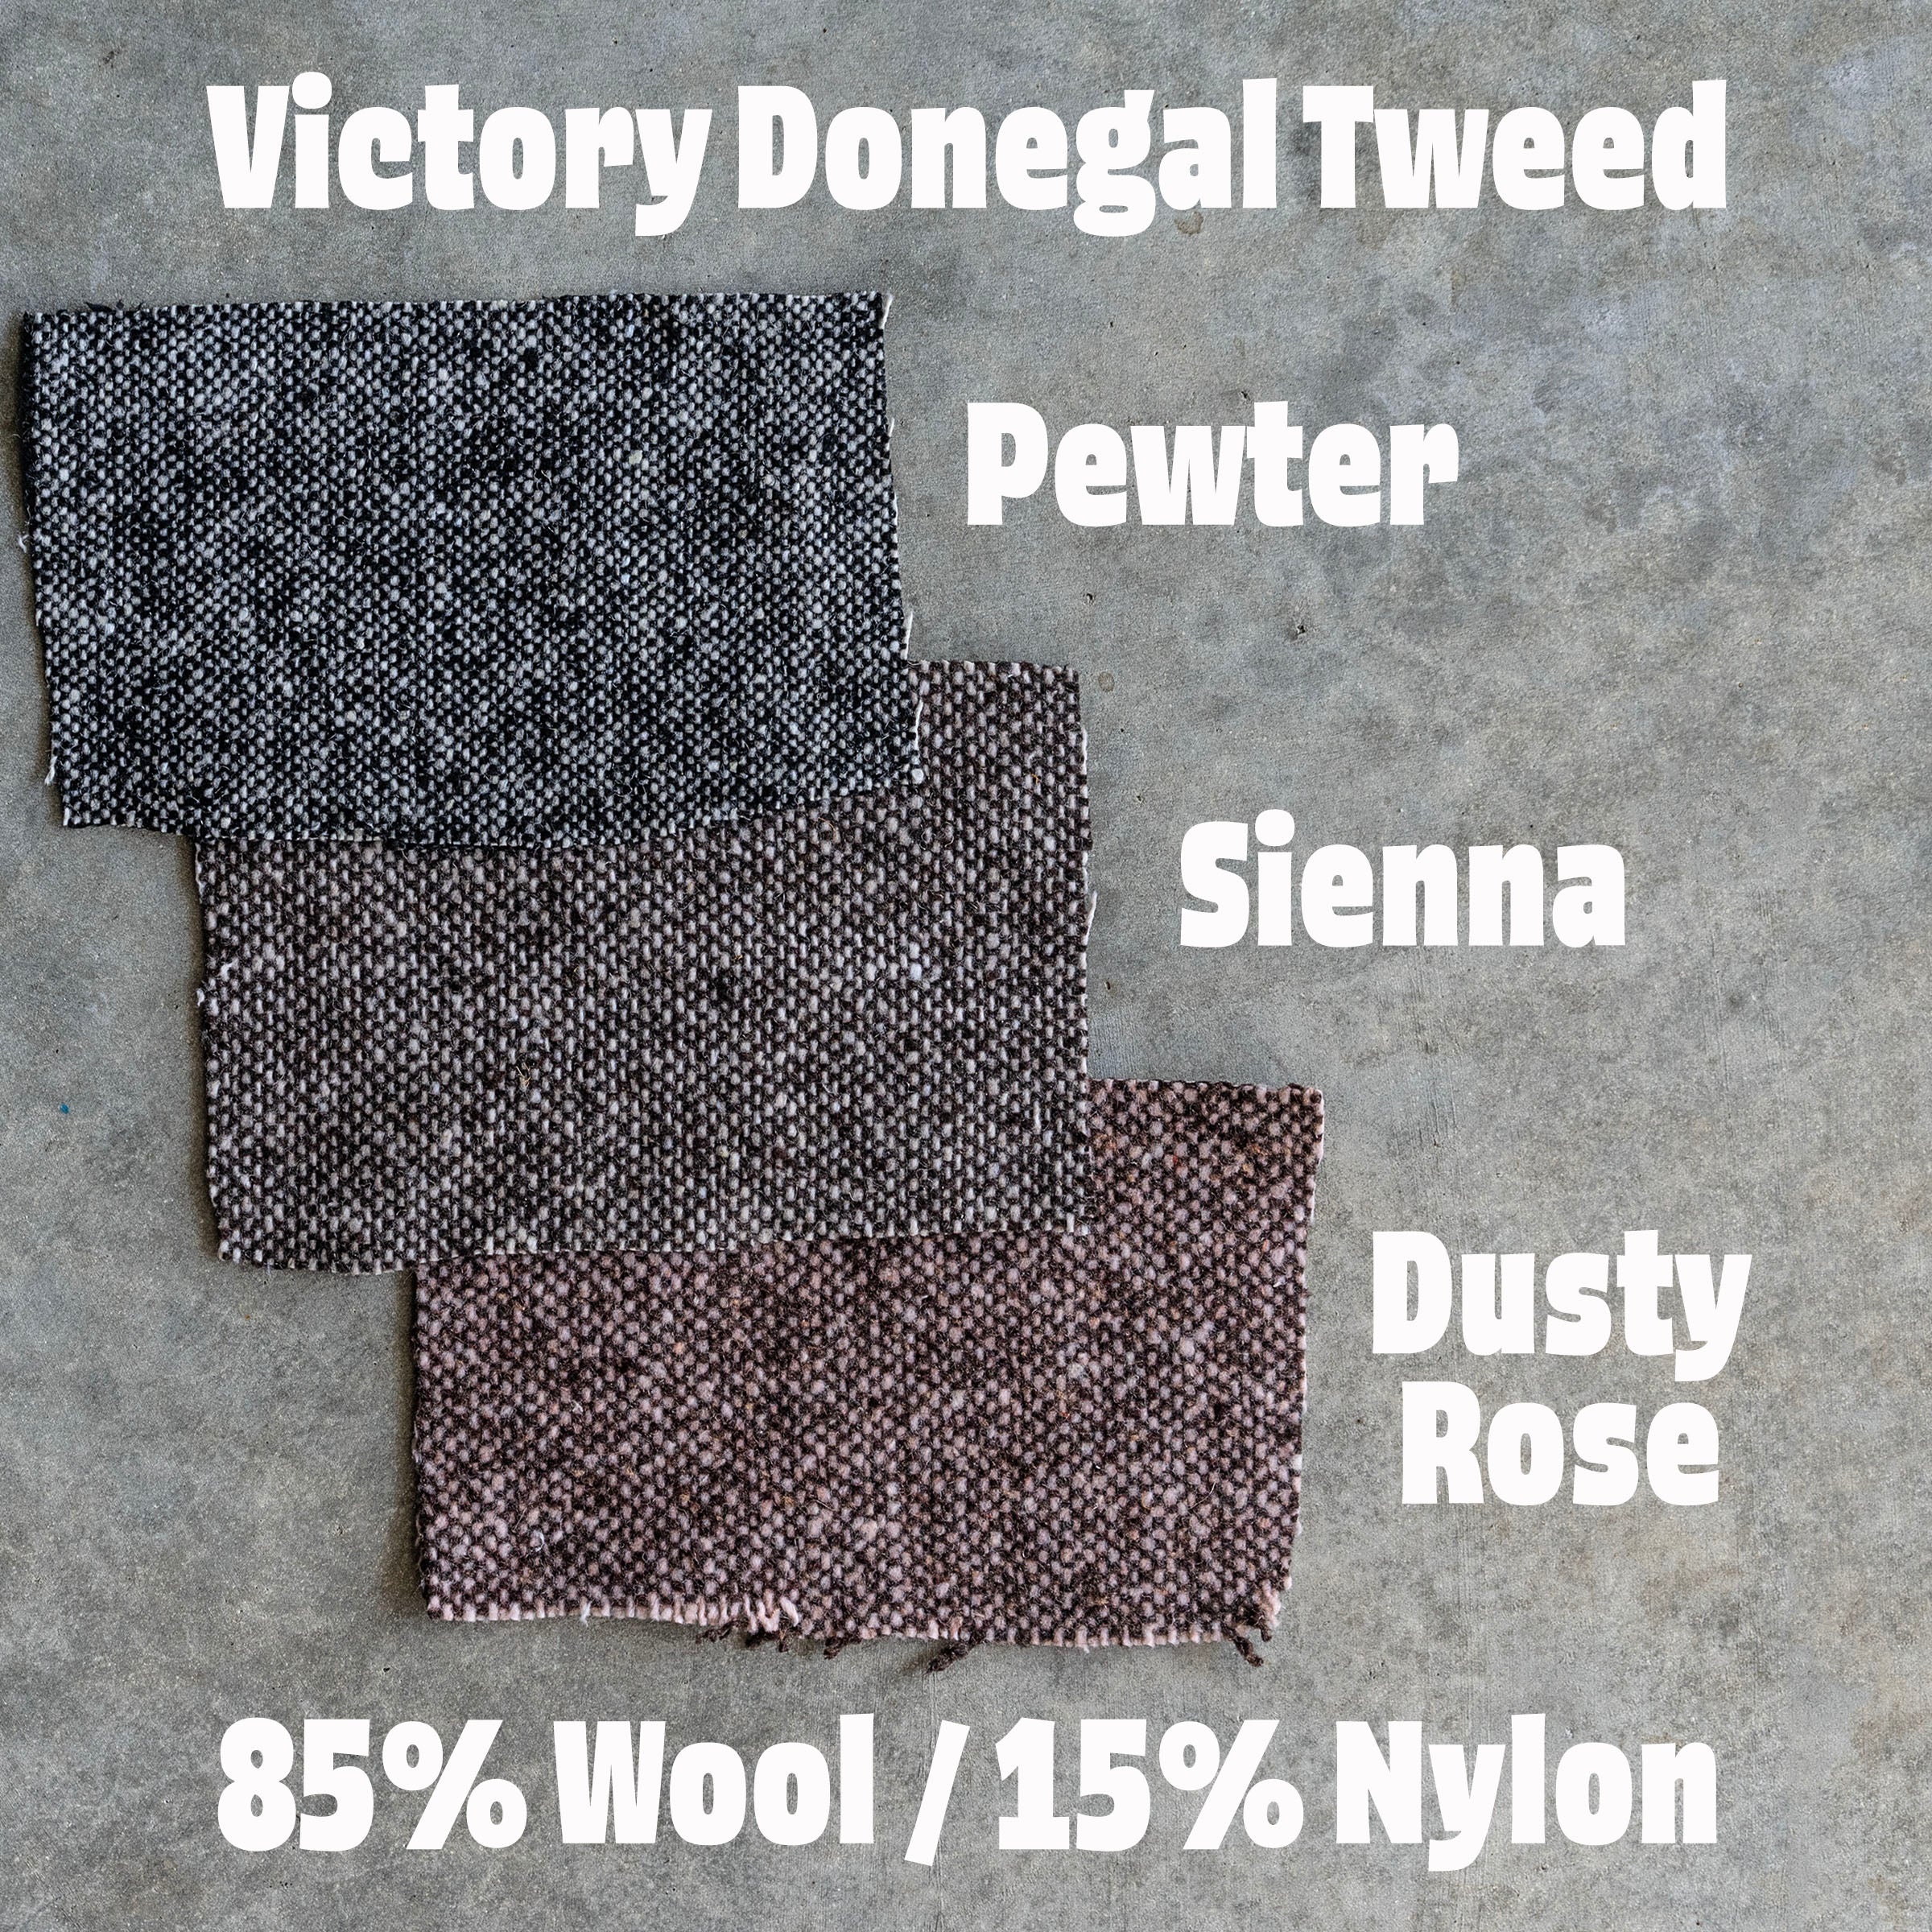 Custom Trousers Washable Victory Donegal Tweed